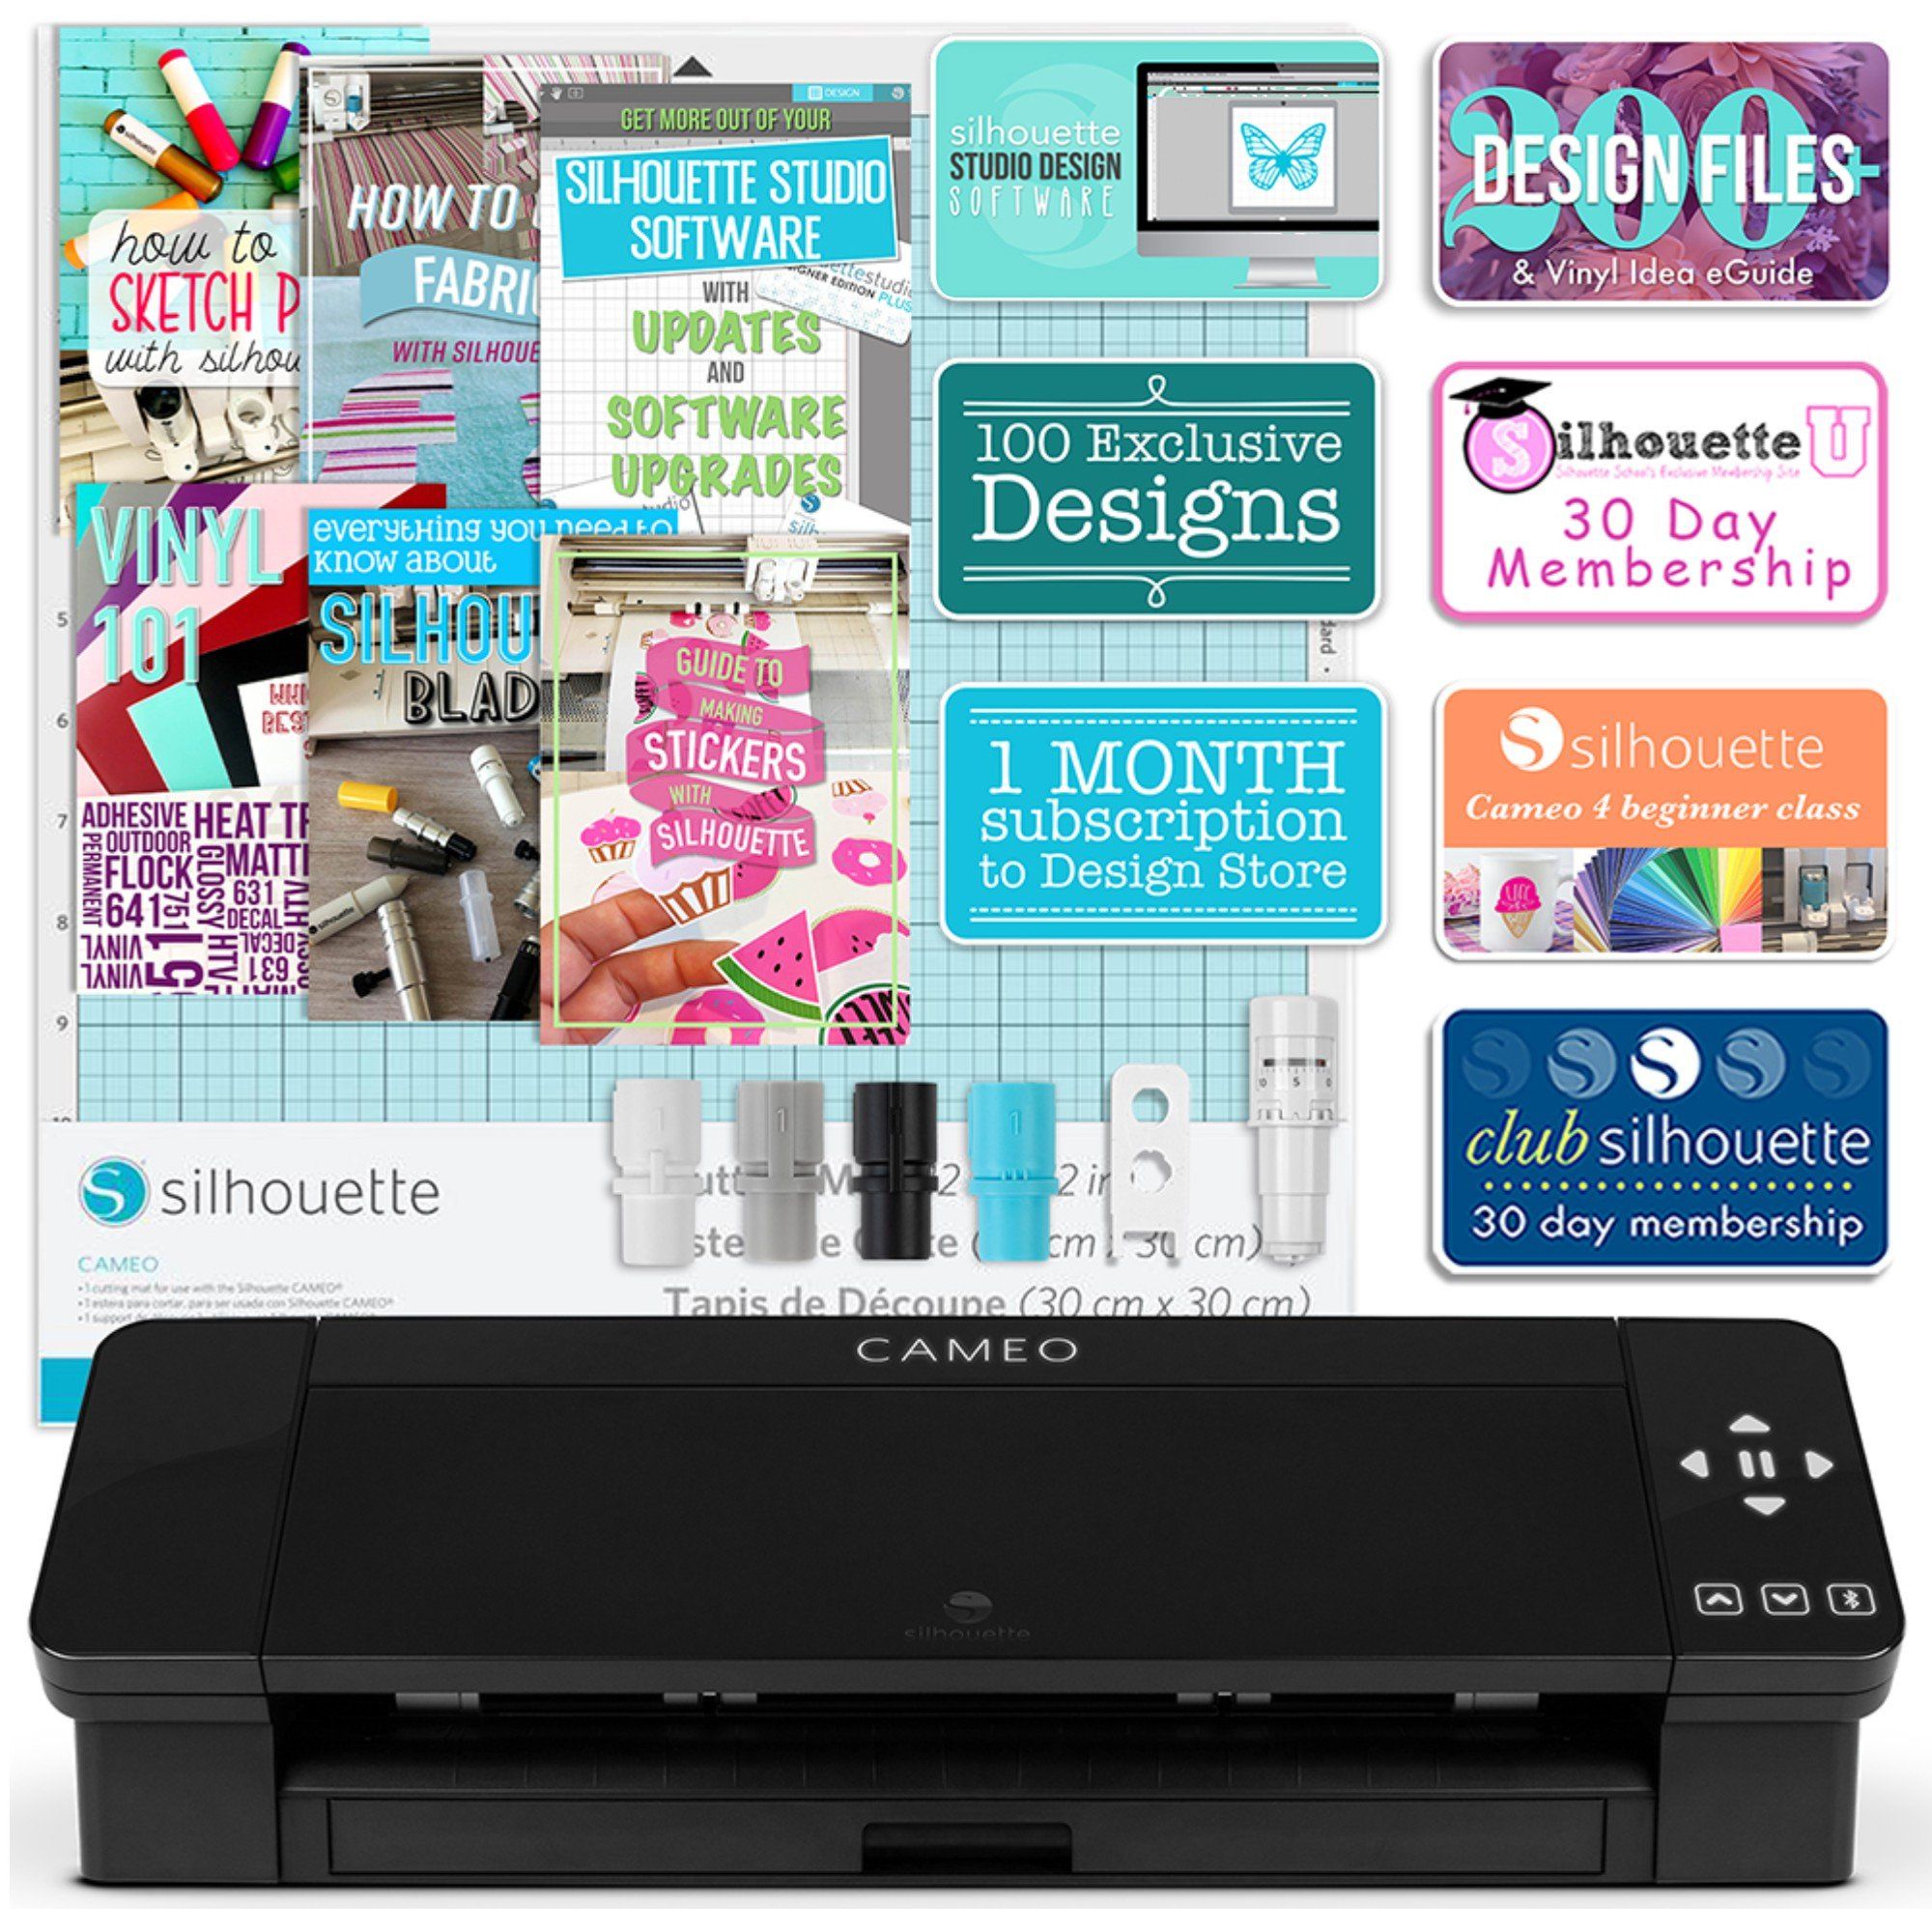 Silhouette Cameo 4 (7 stores) find the best price now »